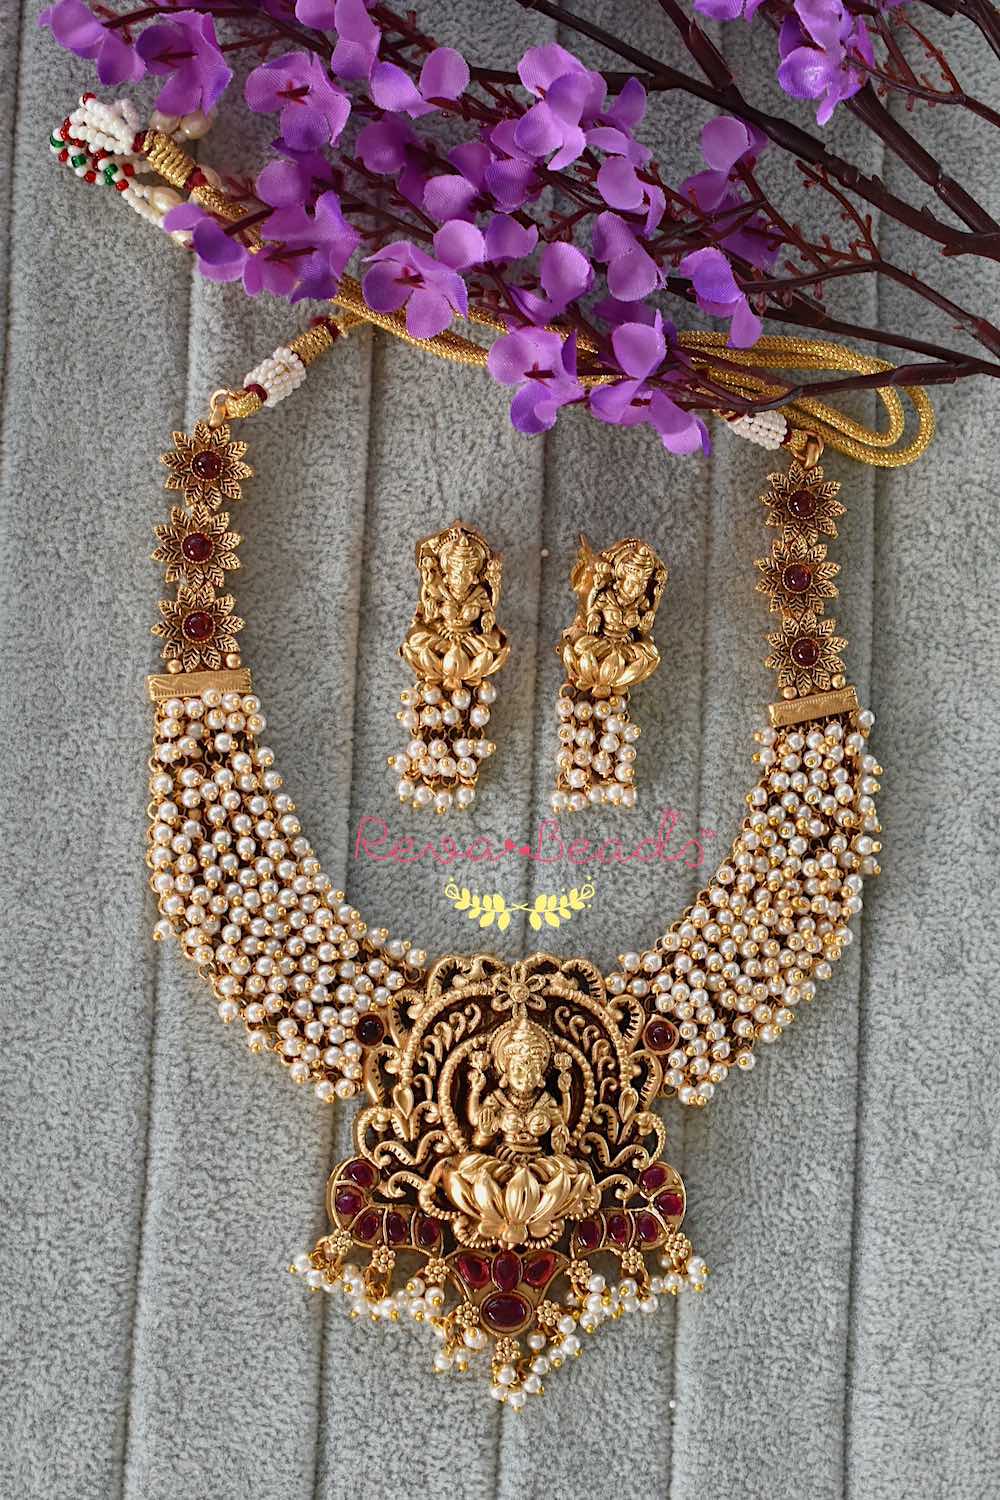 South Indian jewelry